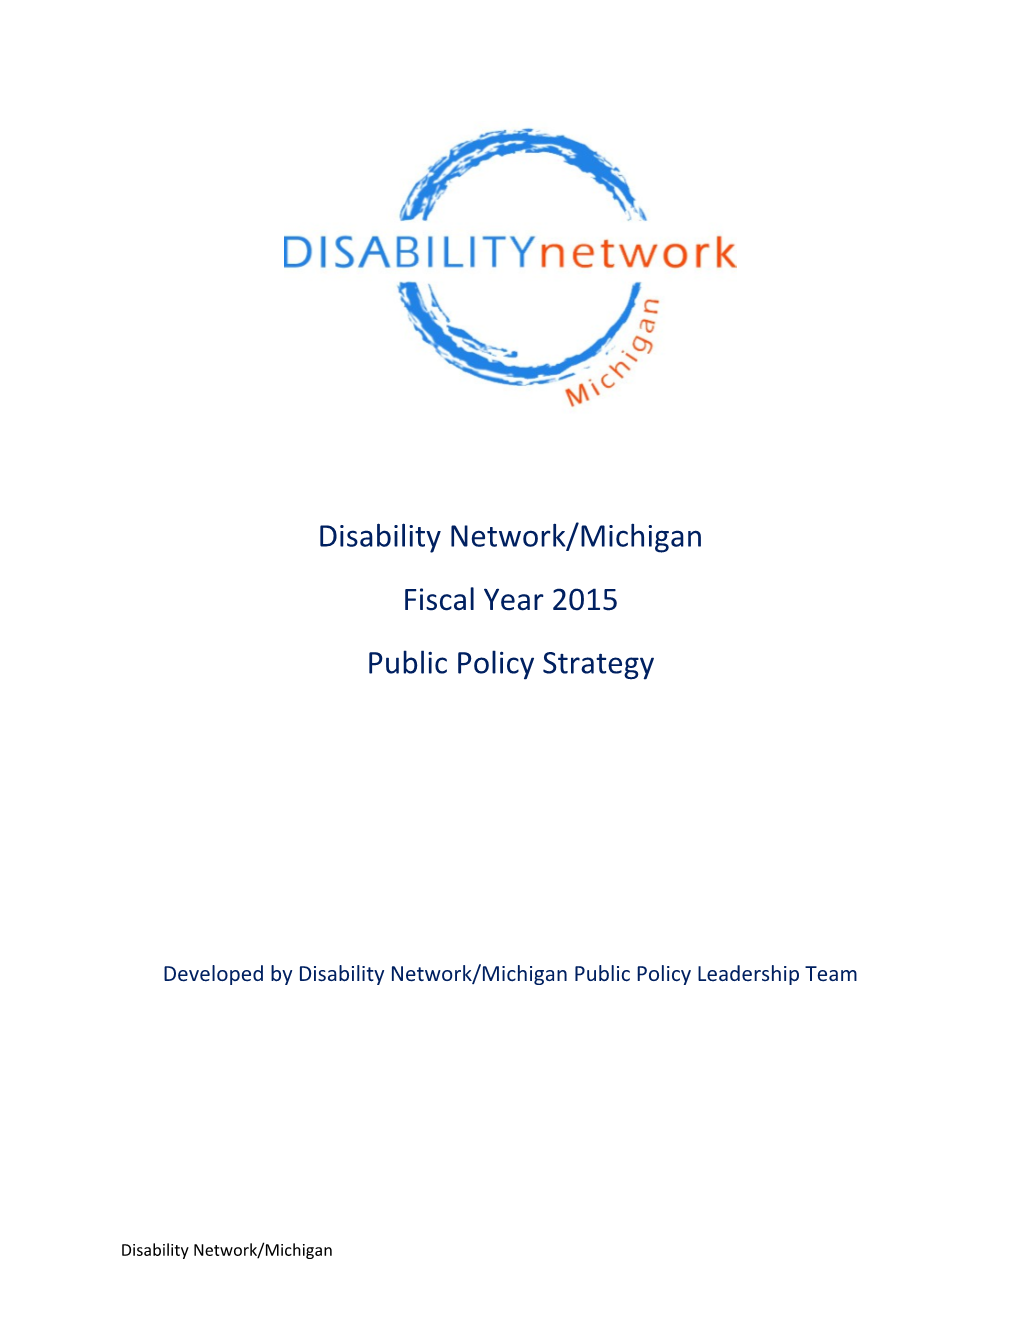 Developed by Disability Network/Michigan Public Policy Leadership Team